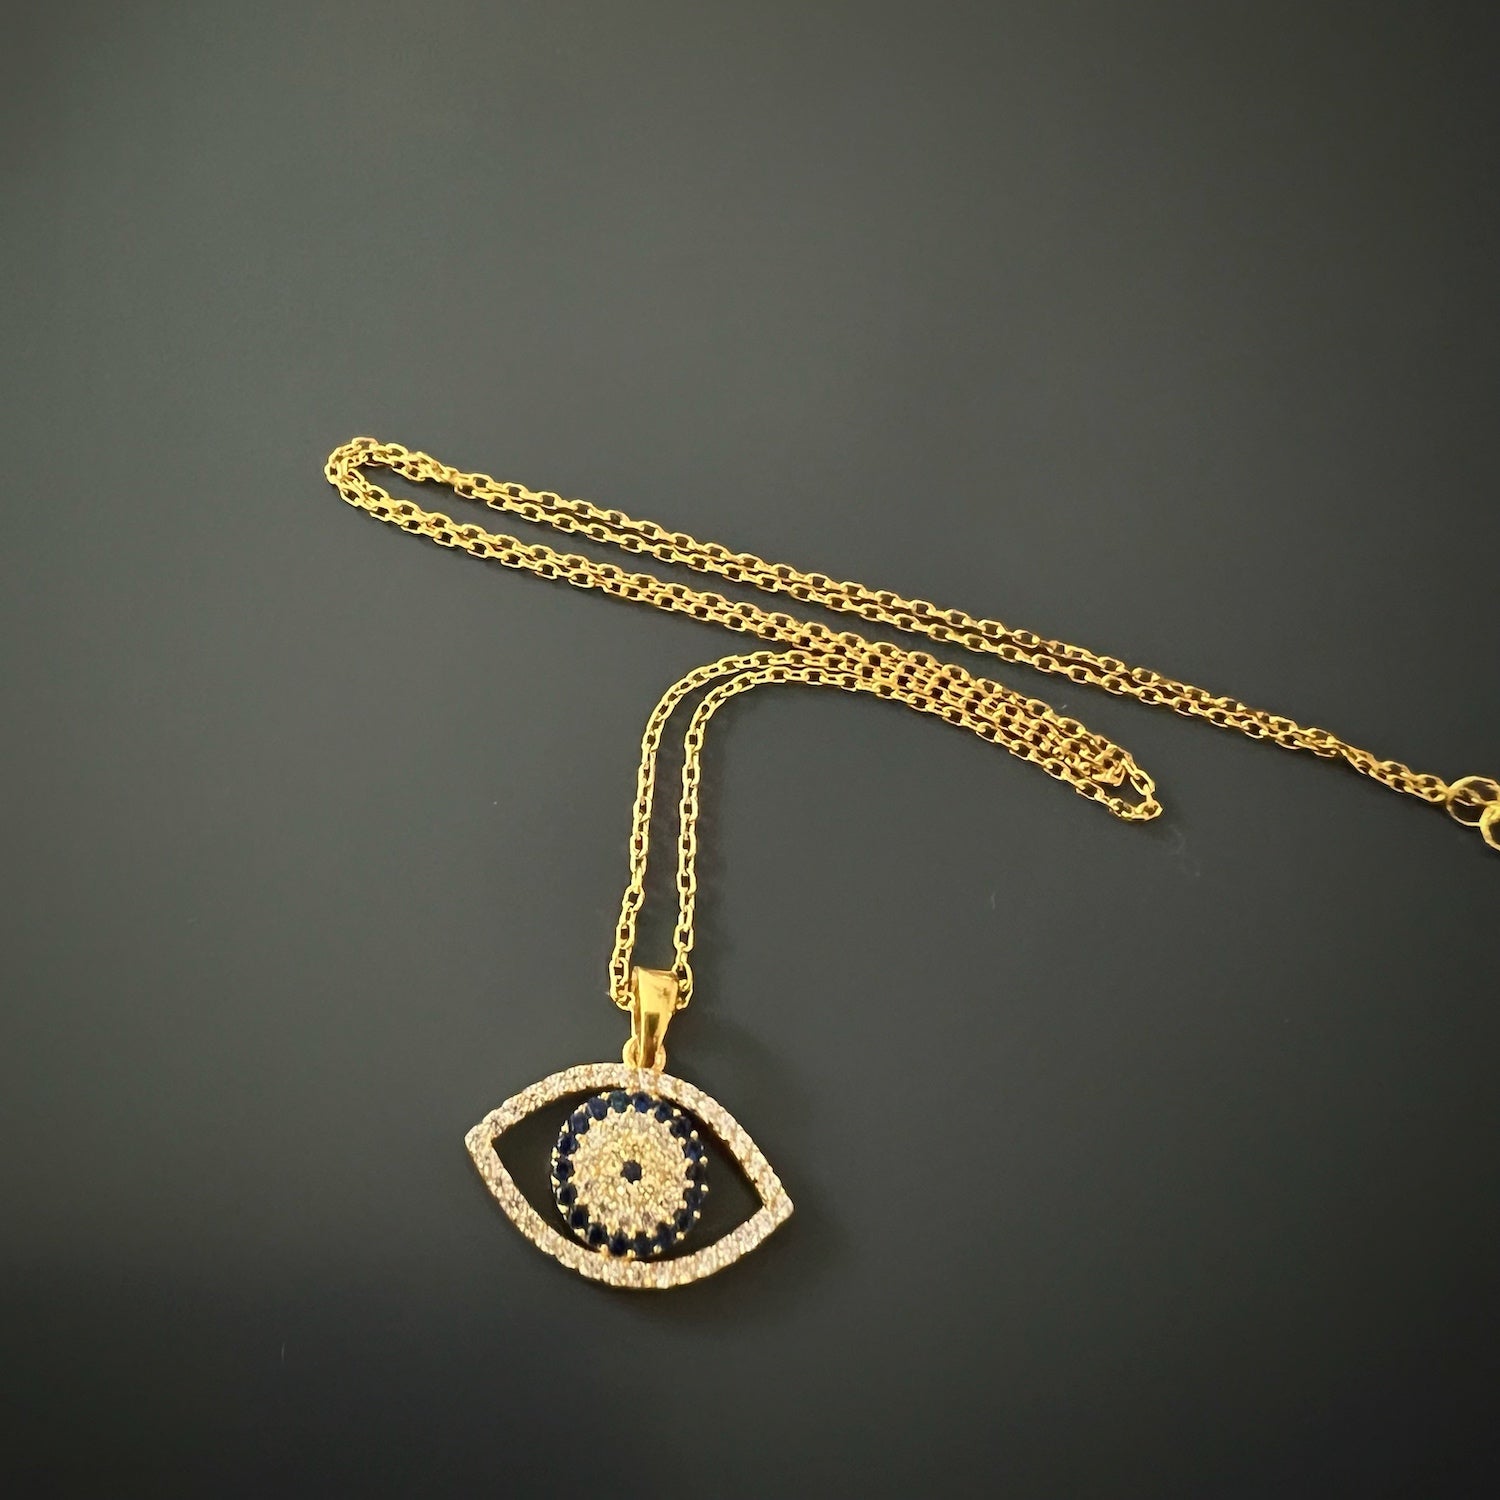 The Sparkly Evil Eye Necklace, a harmonious blend of sophistication and glamour.